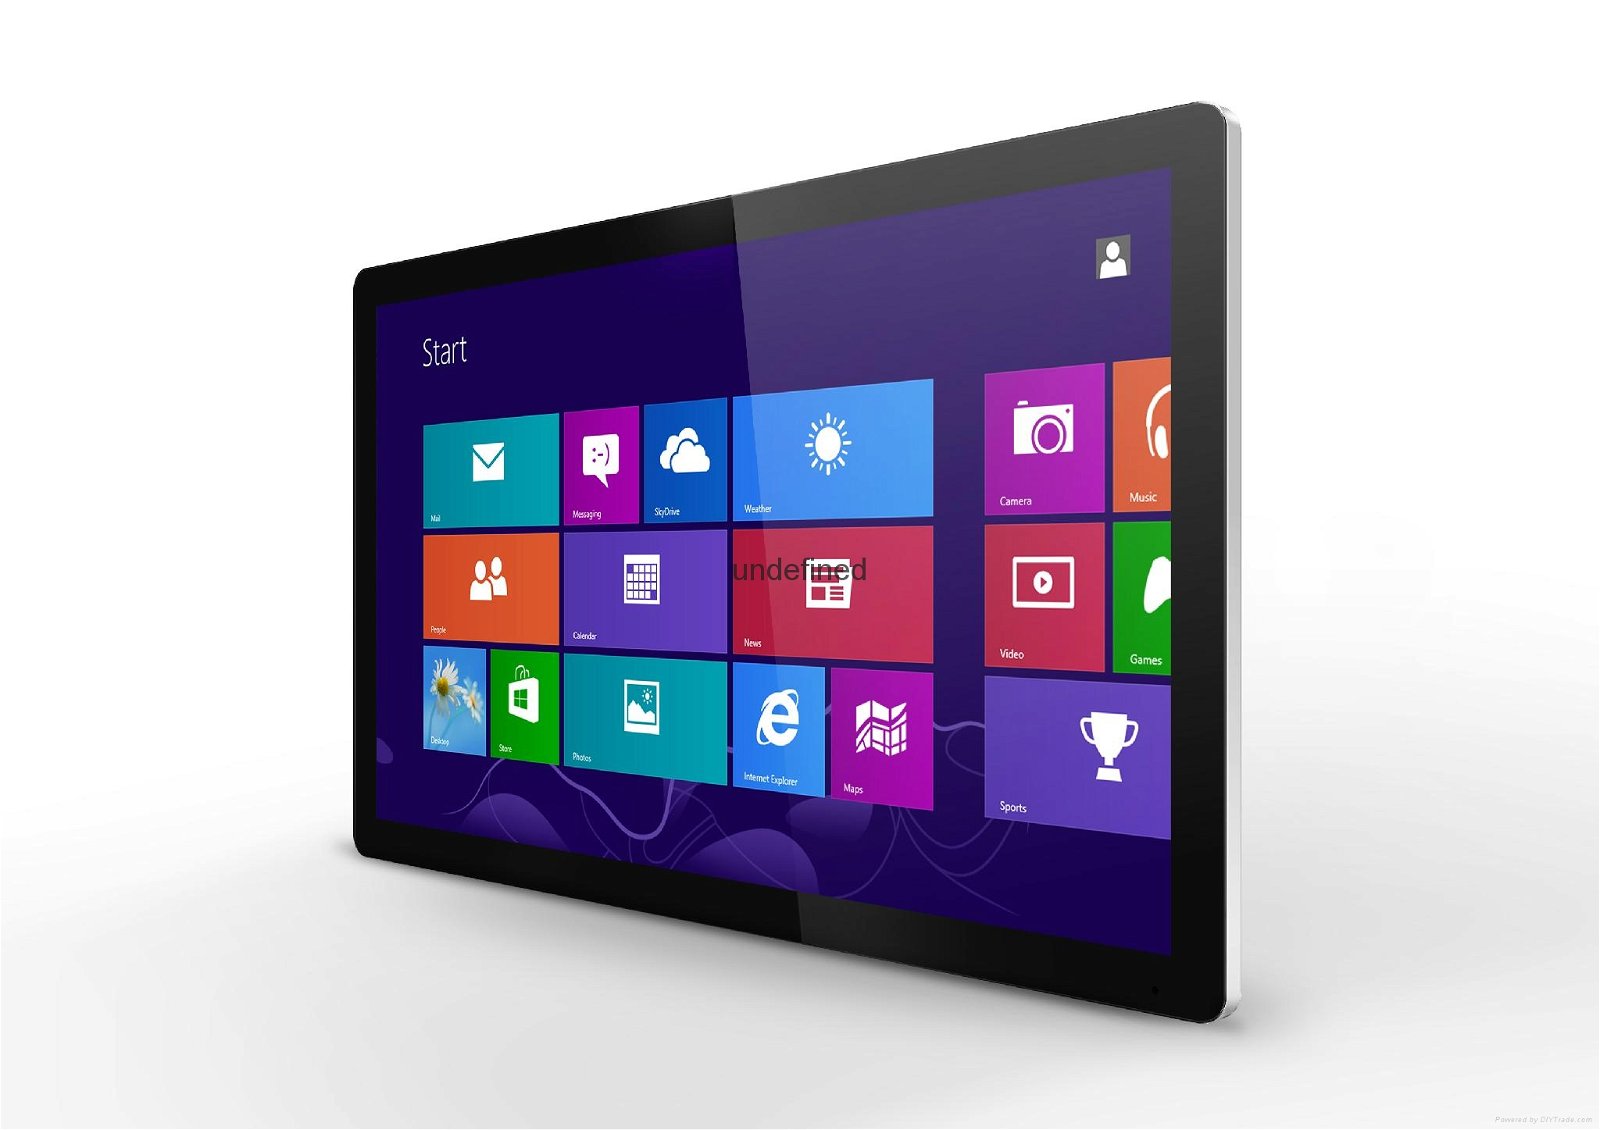 21.5-55inch Wall Mounting PC AIO Capacitive Touch Display